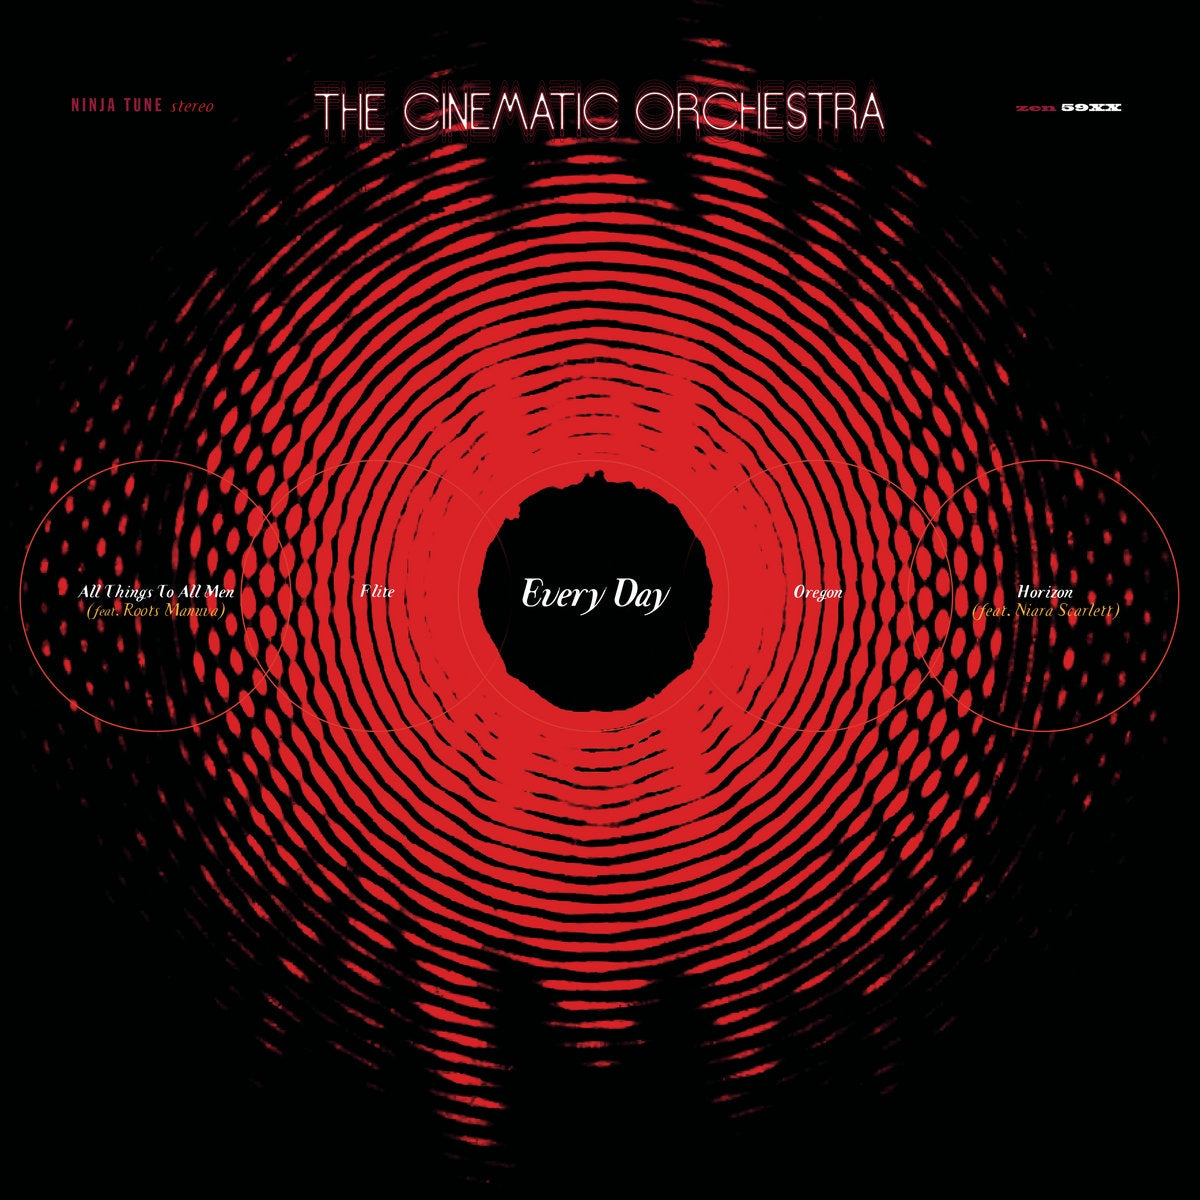 The Cinematic Orchestra – Every Day (20th Anniversary Edition)